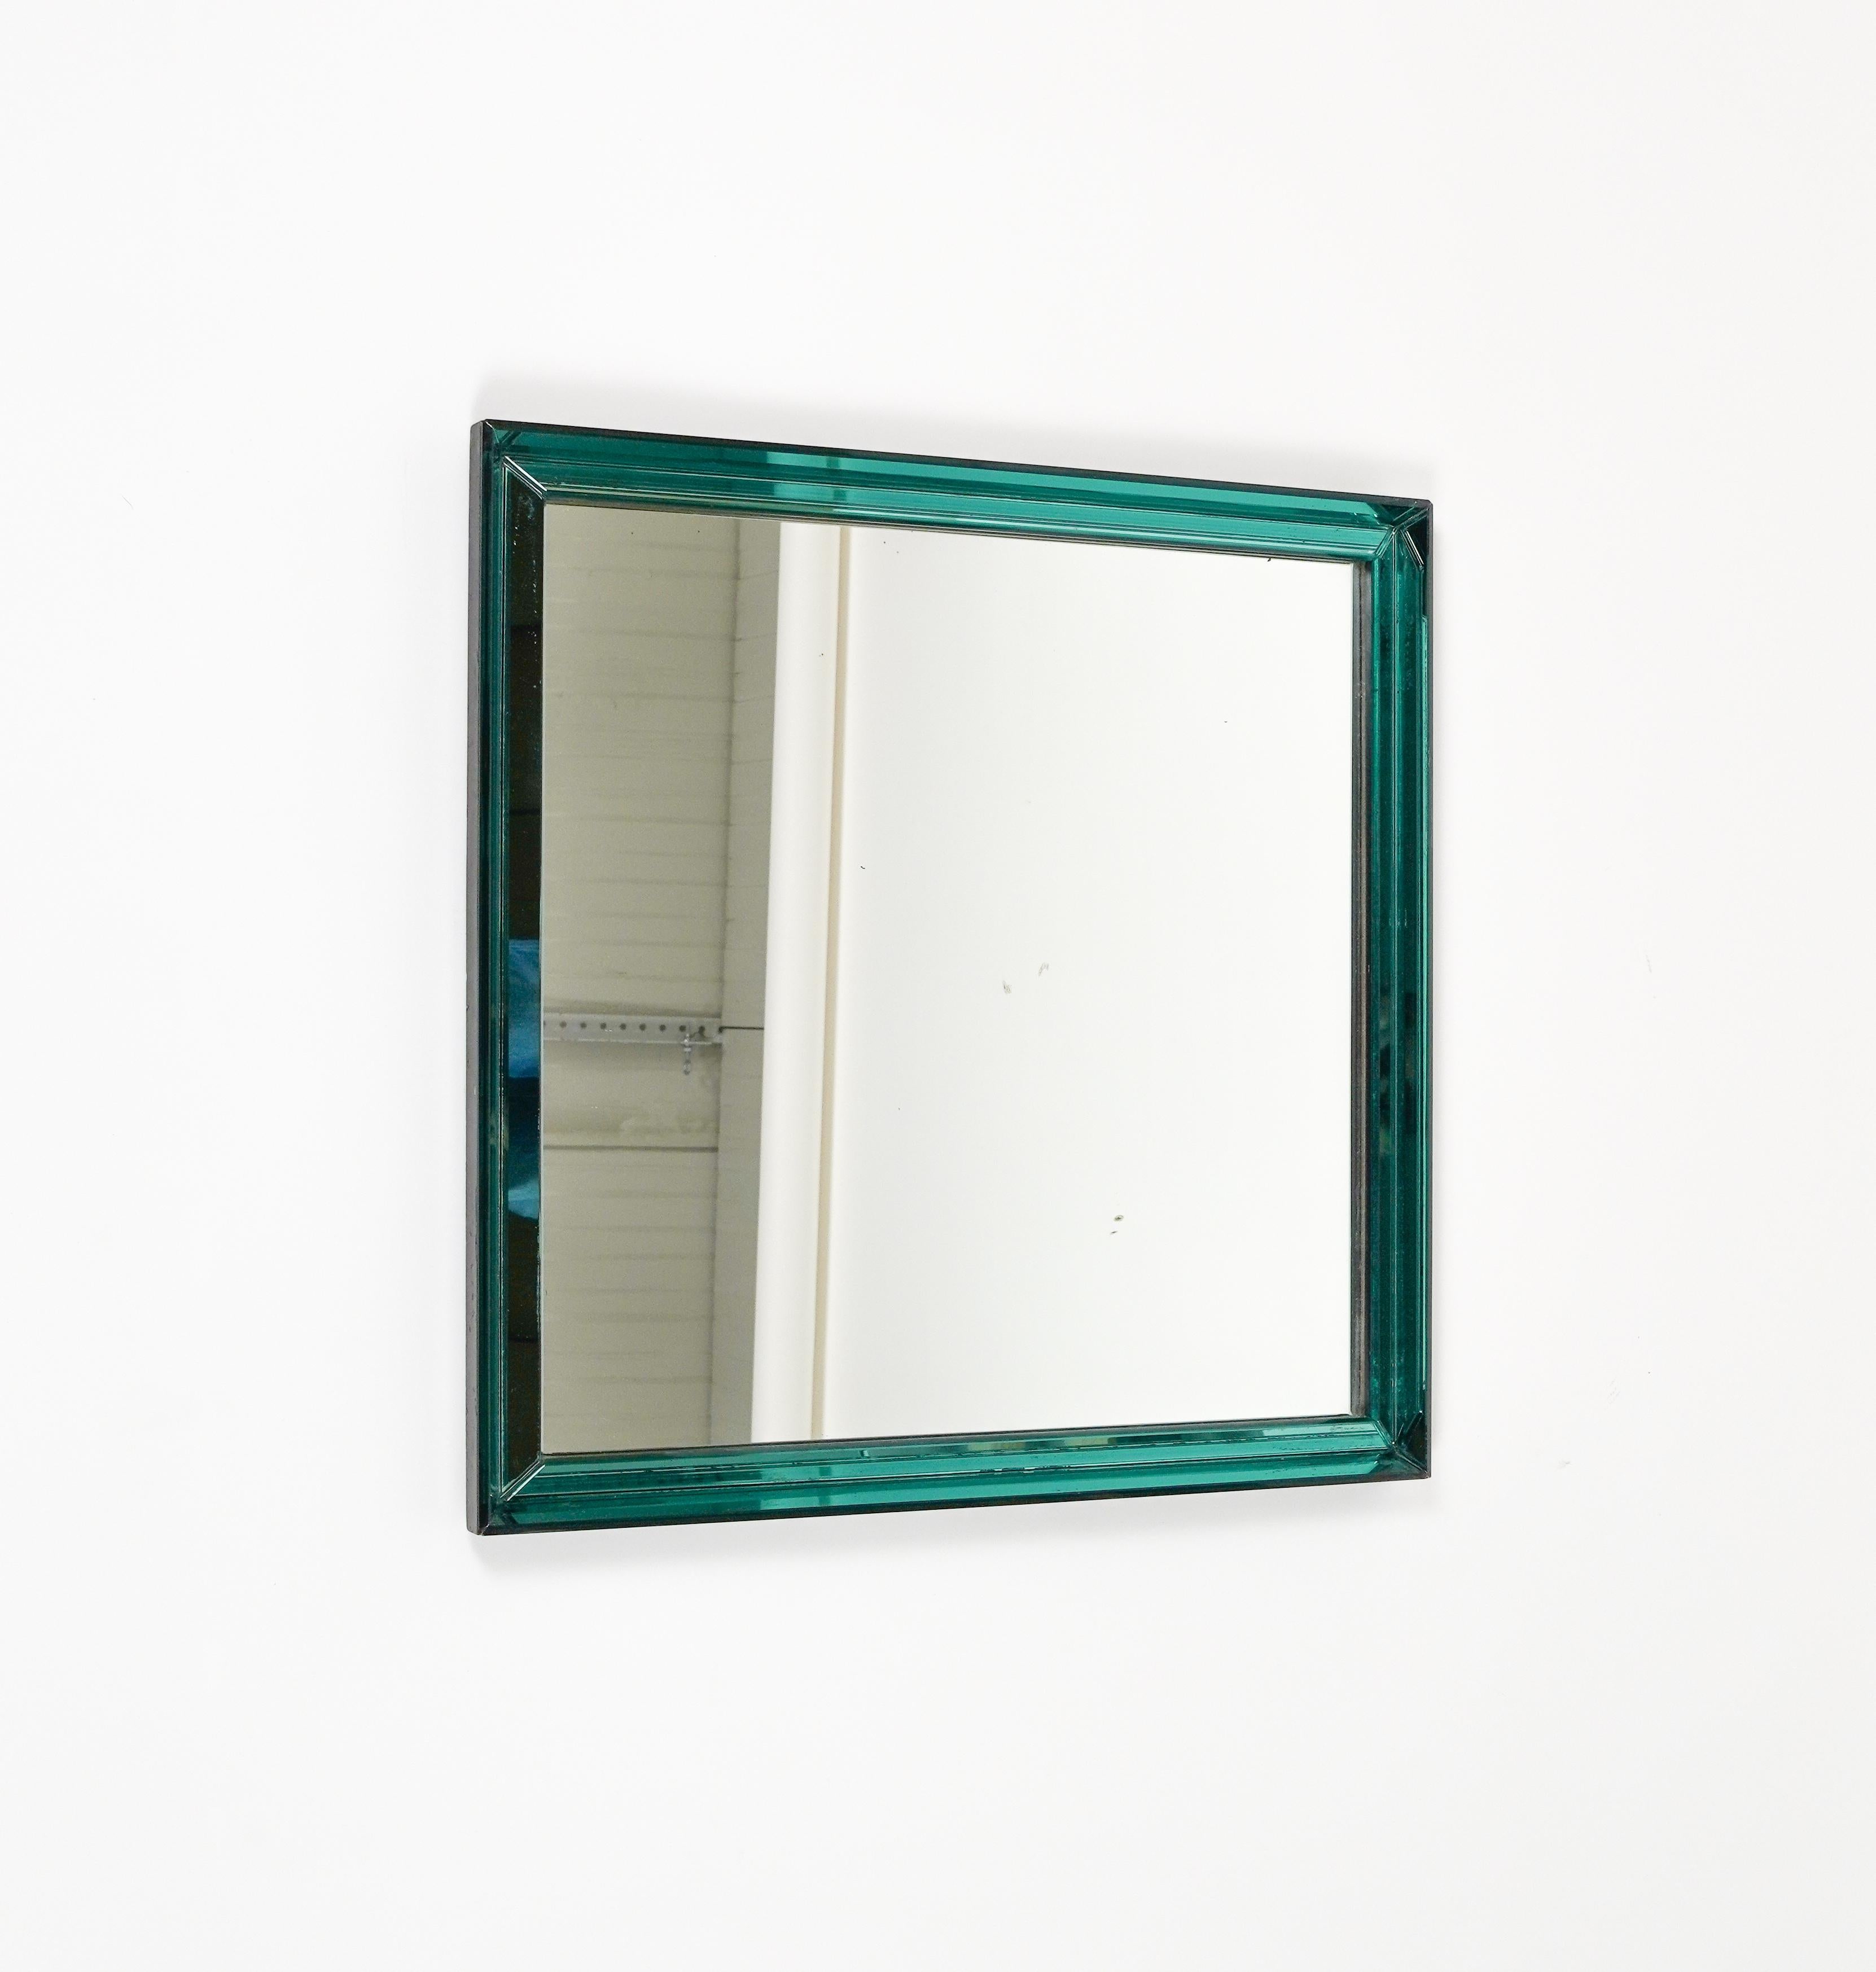 Midcentury Squared Wall Mirror by Max Ingrand for Fontana Arte, Italy 1960s In Good Condition For Sale In Rome, IT